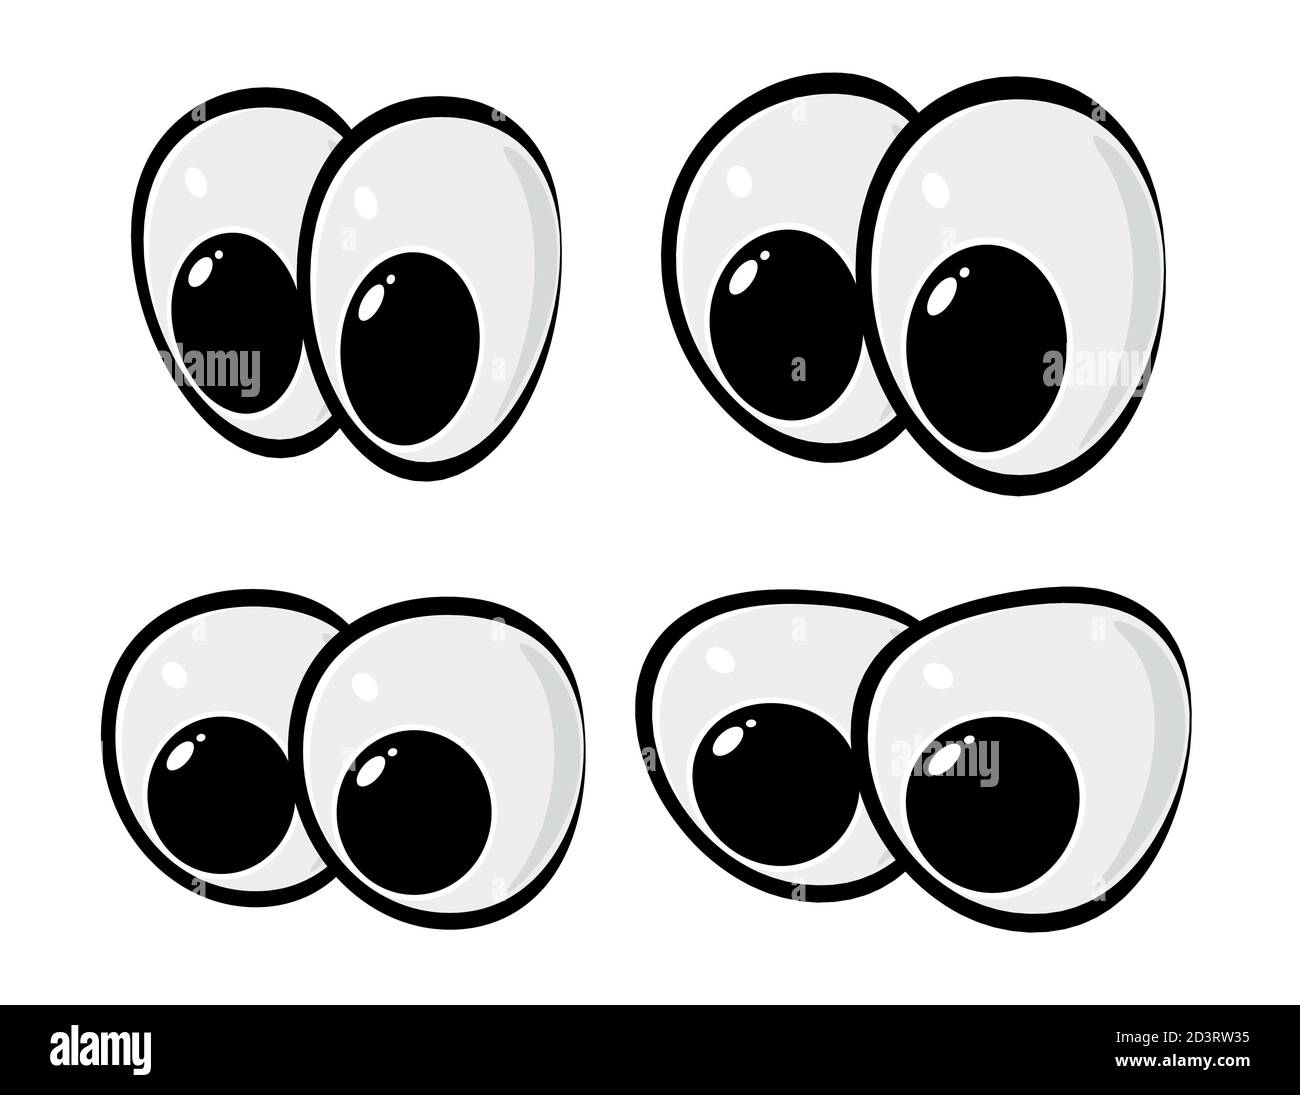 Eyes vector set isolated on white. Clipart illustration element for comic animals or human face.  Image of eyeball facial expression. Happy eyesight f Stock Vector